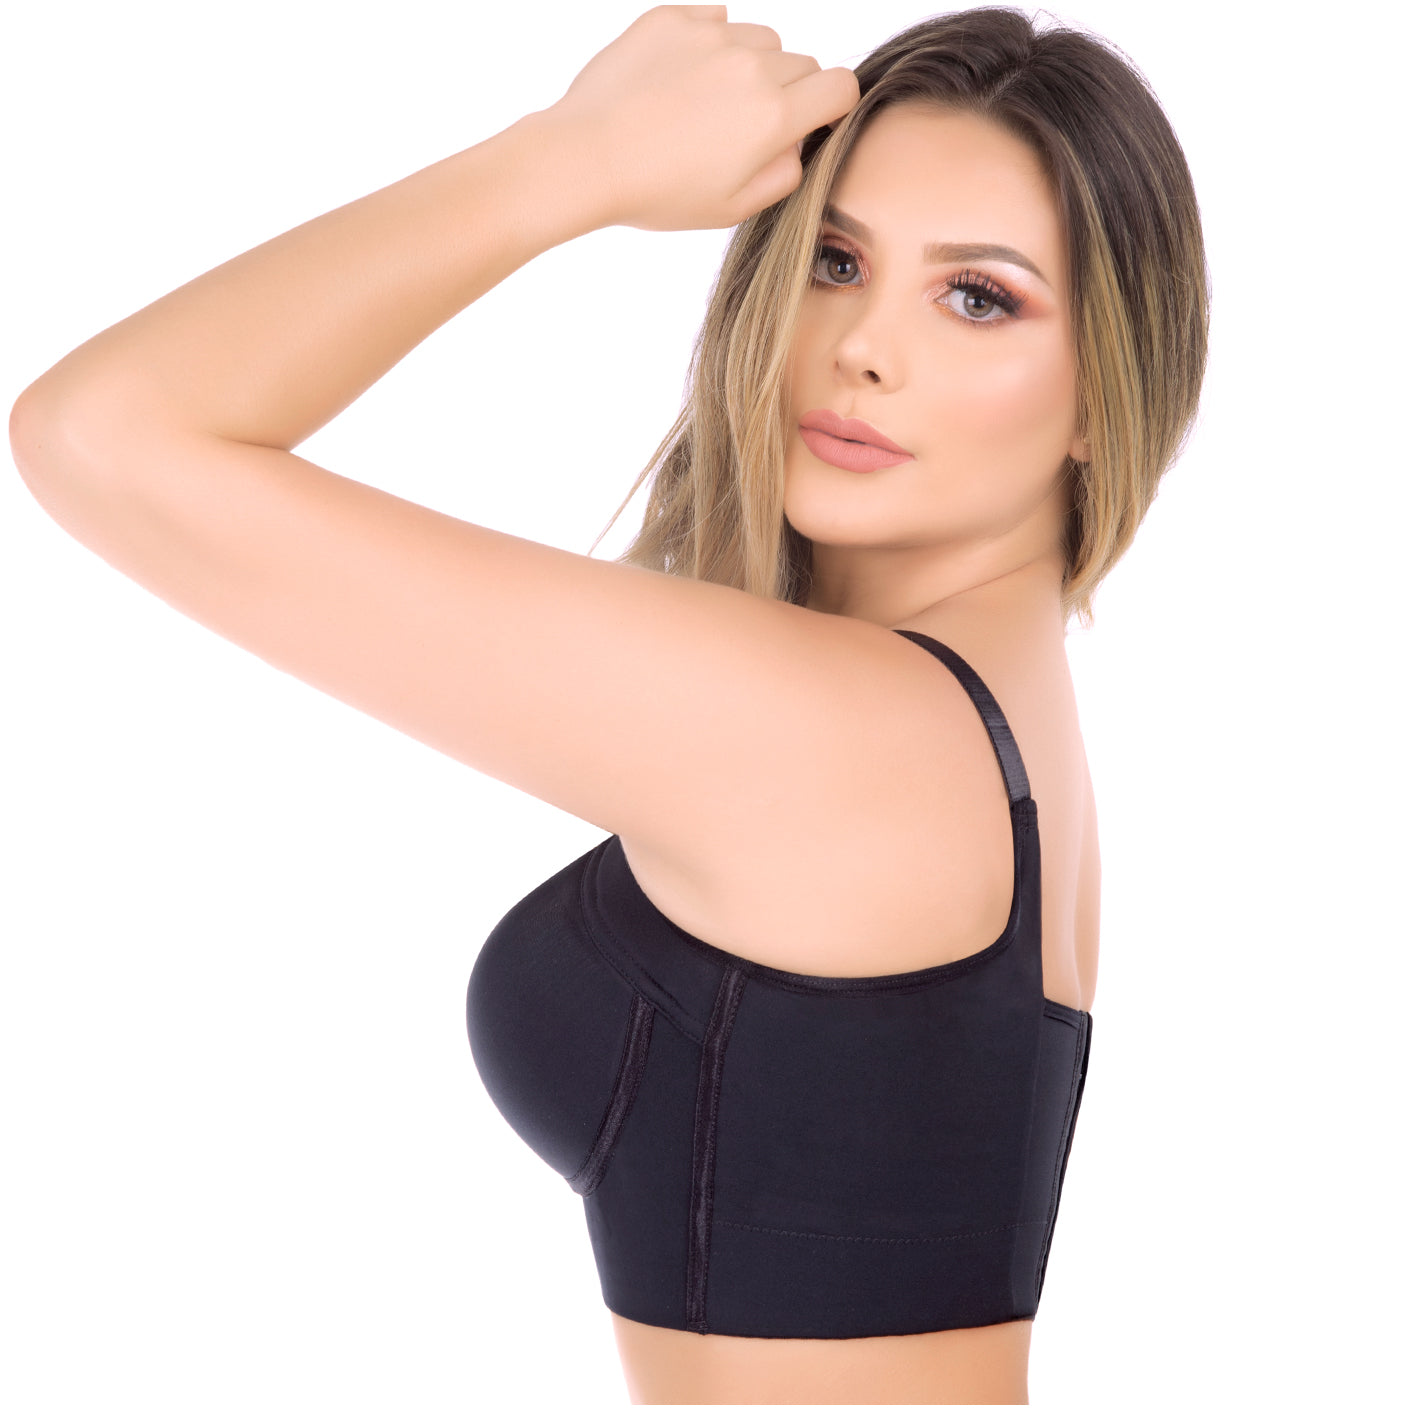 UpLady 8532 - Extra Firm High Compression Full Cup Push Up Bra